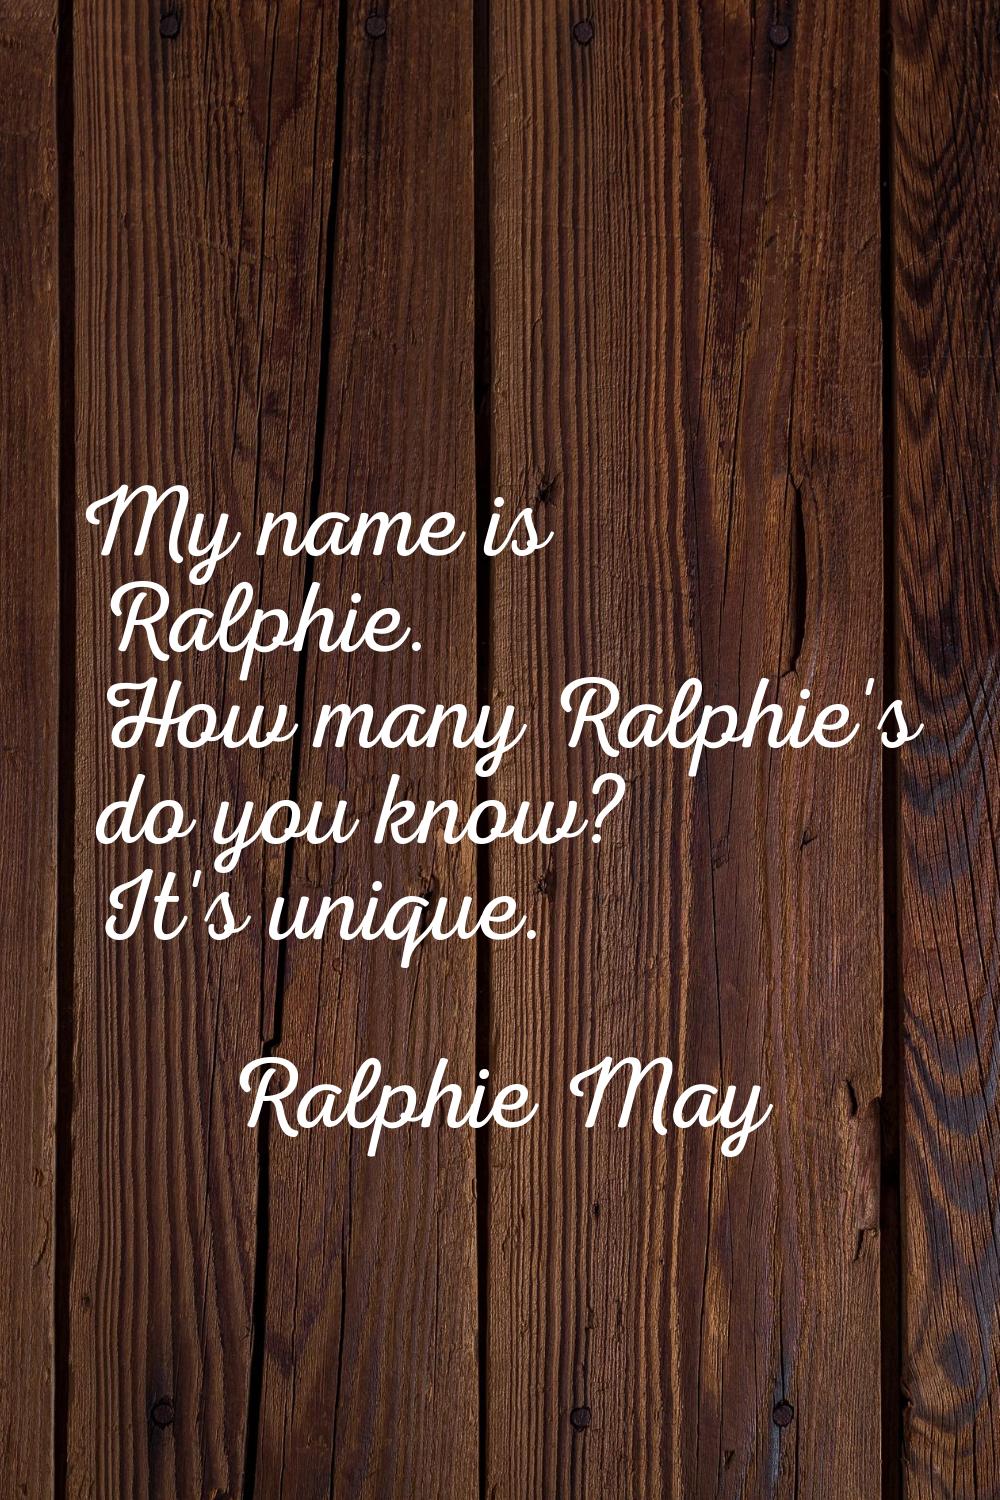 My name is Ralphie. How many Ralphie's do you know? It's unique.